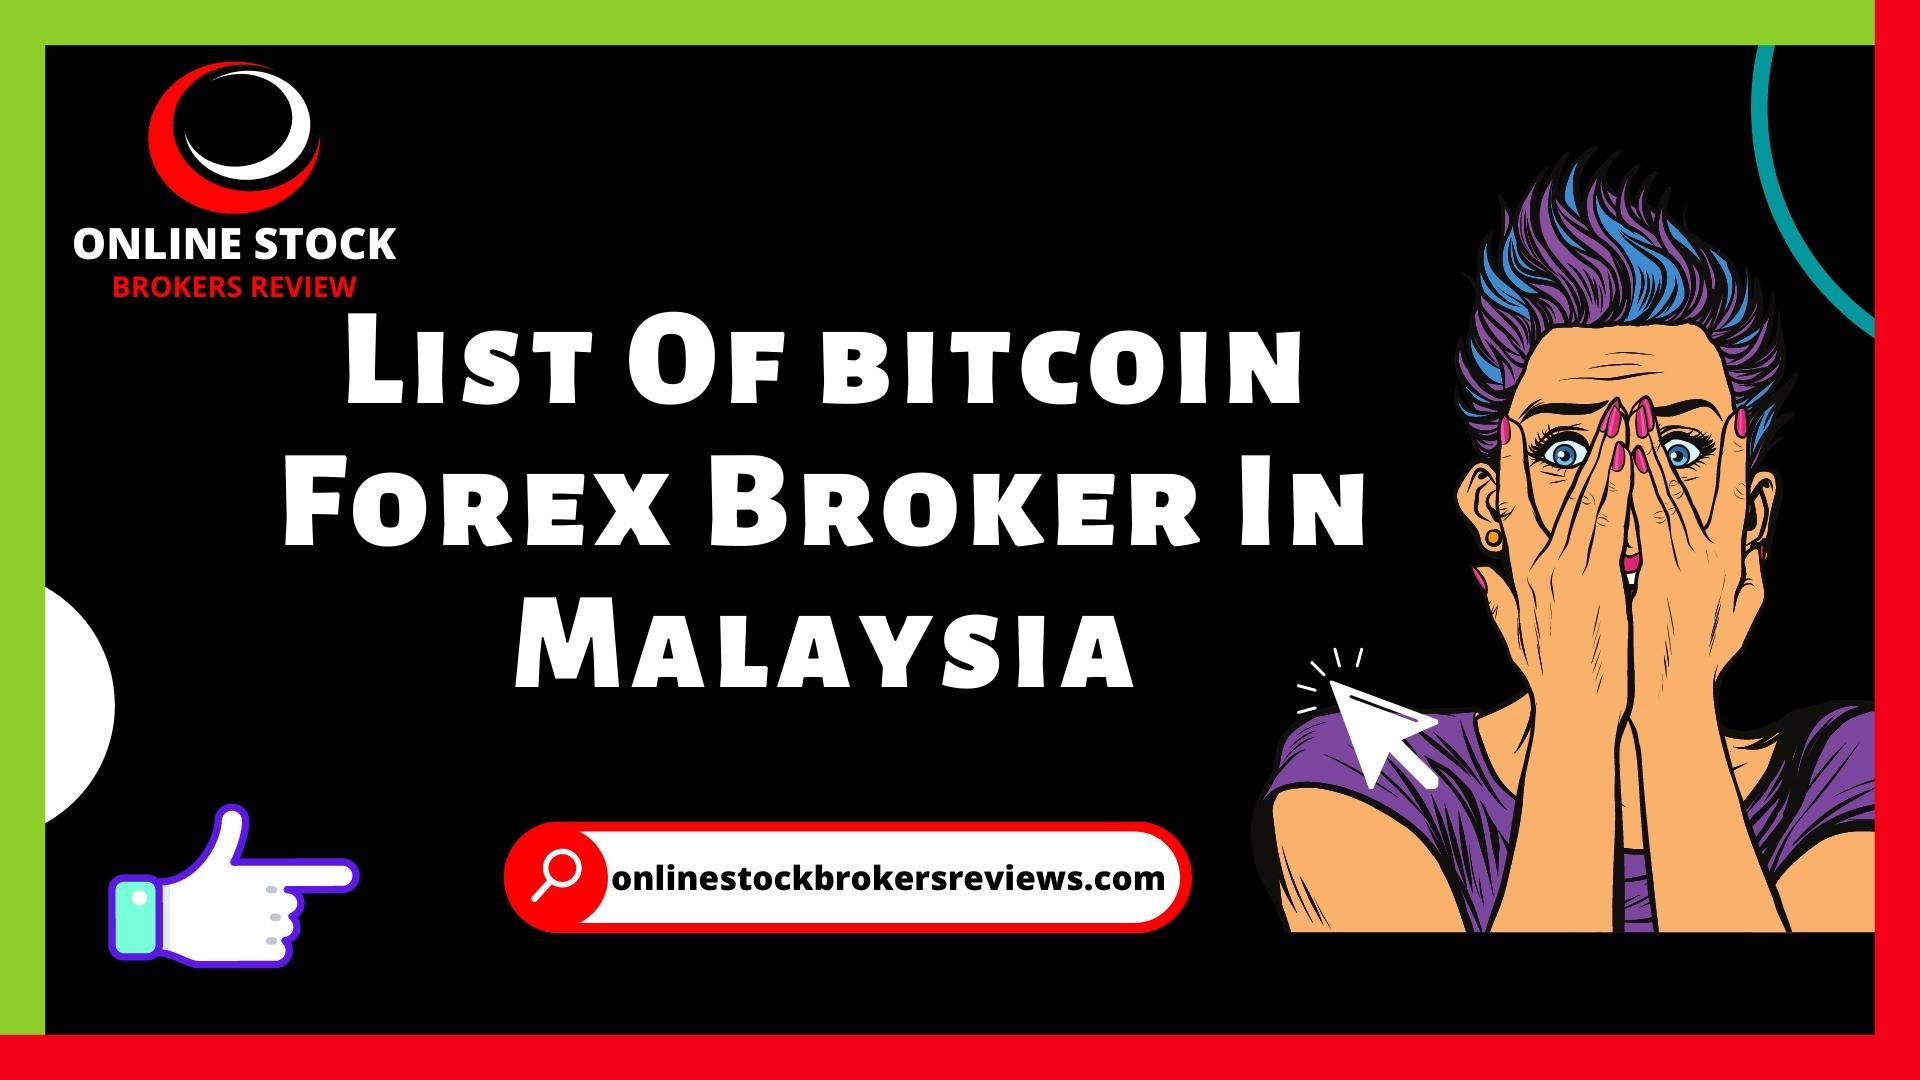 List Of BitCoin Forex Brokers In Malaysia - Online Stock Brokers Reviews